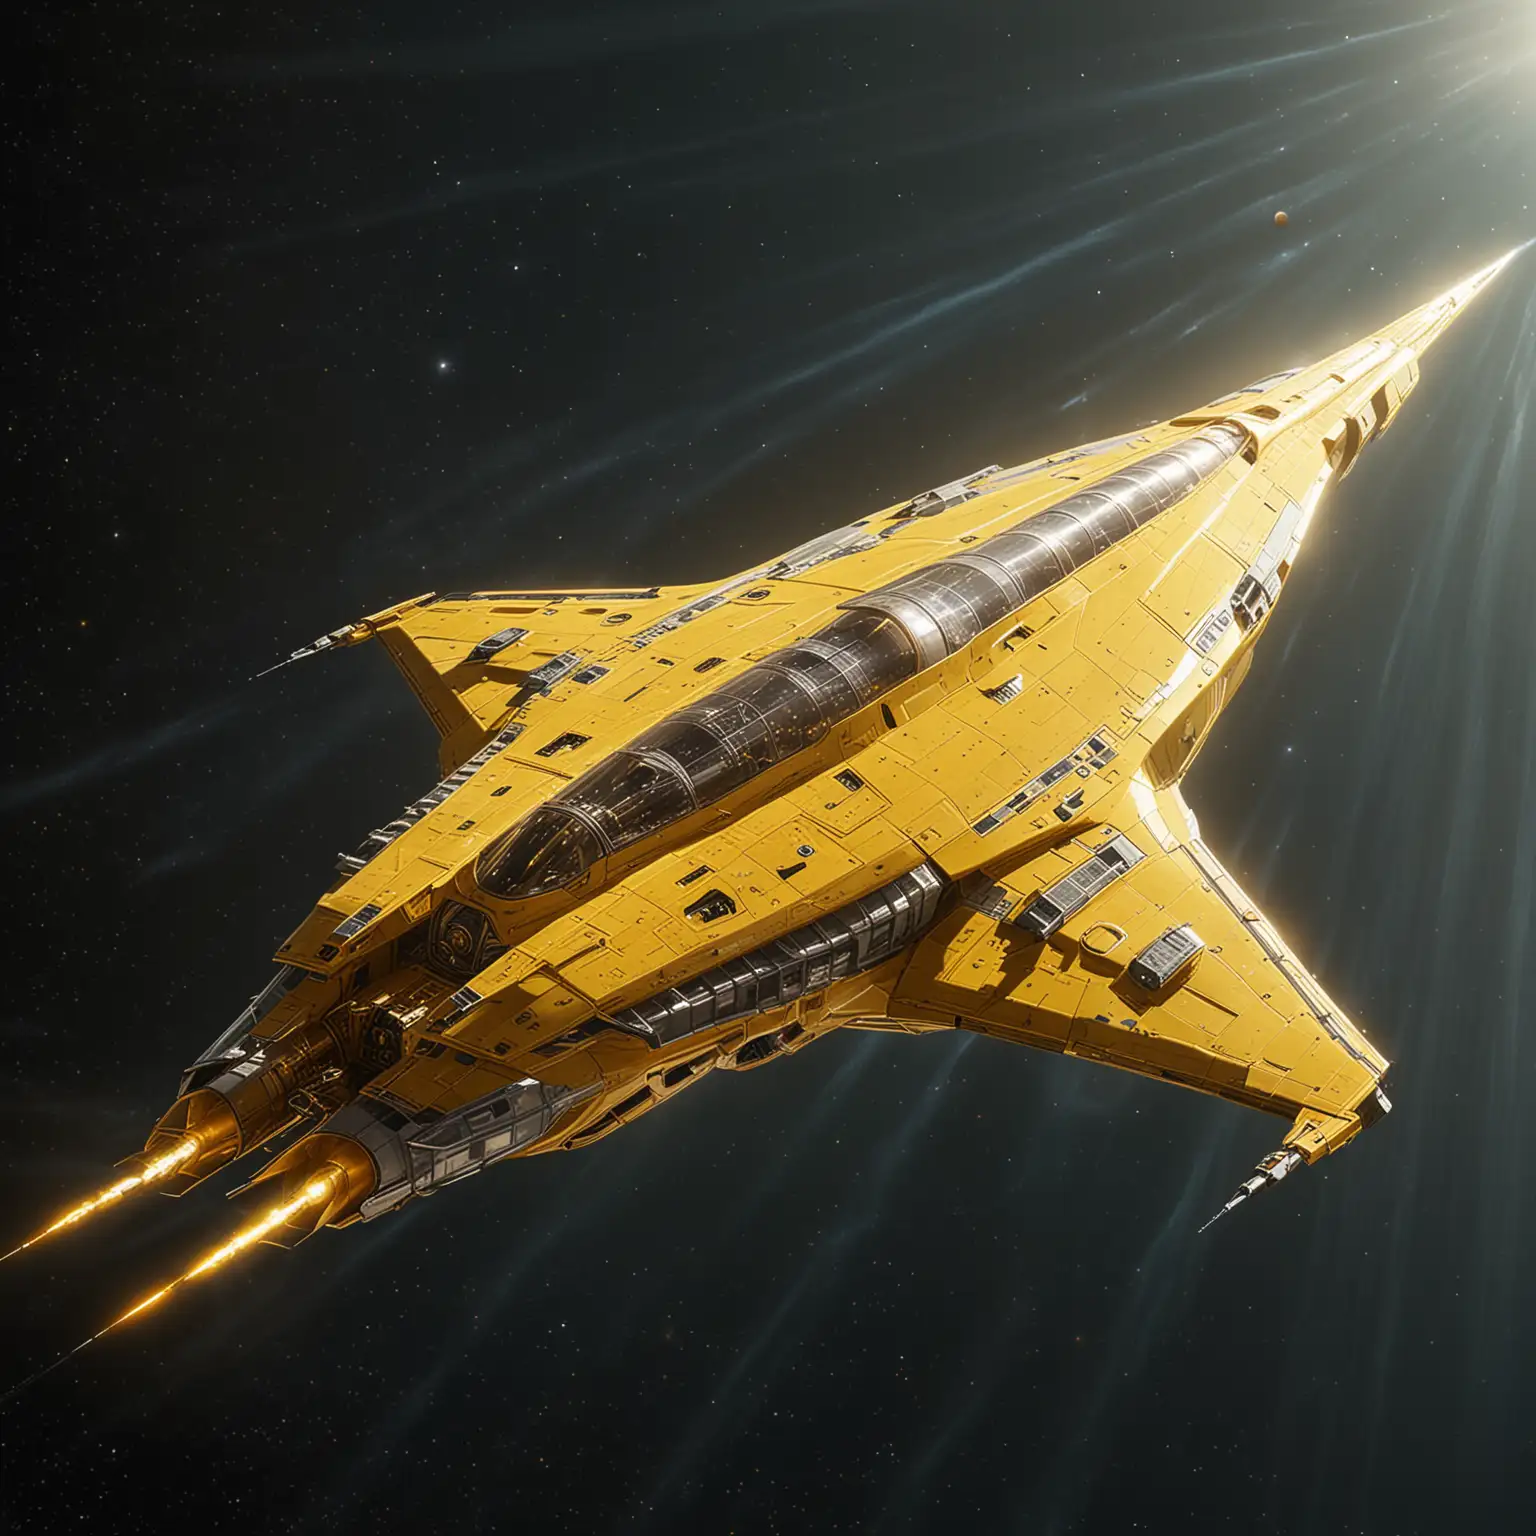 massive see-through spaceship shaped with wing type sides and long thin nose, lit up bright yellow, sucking up sun rays in space